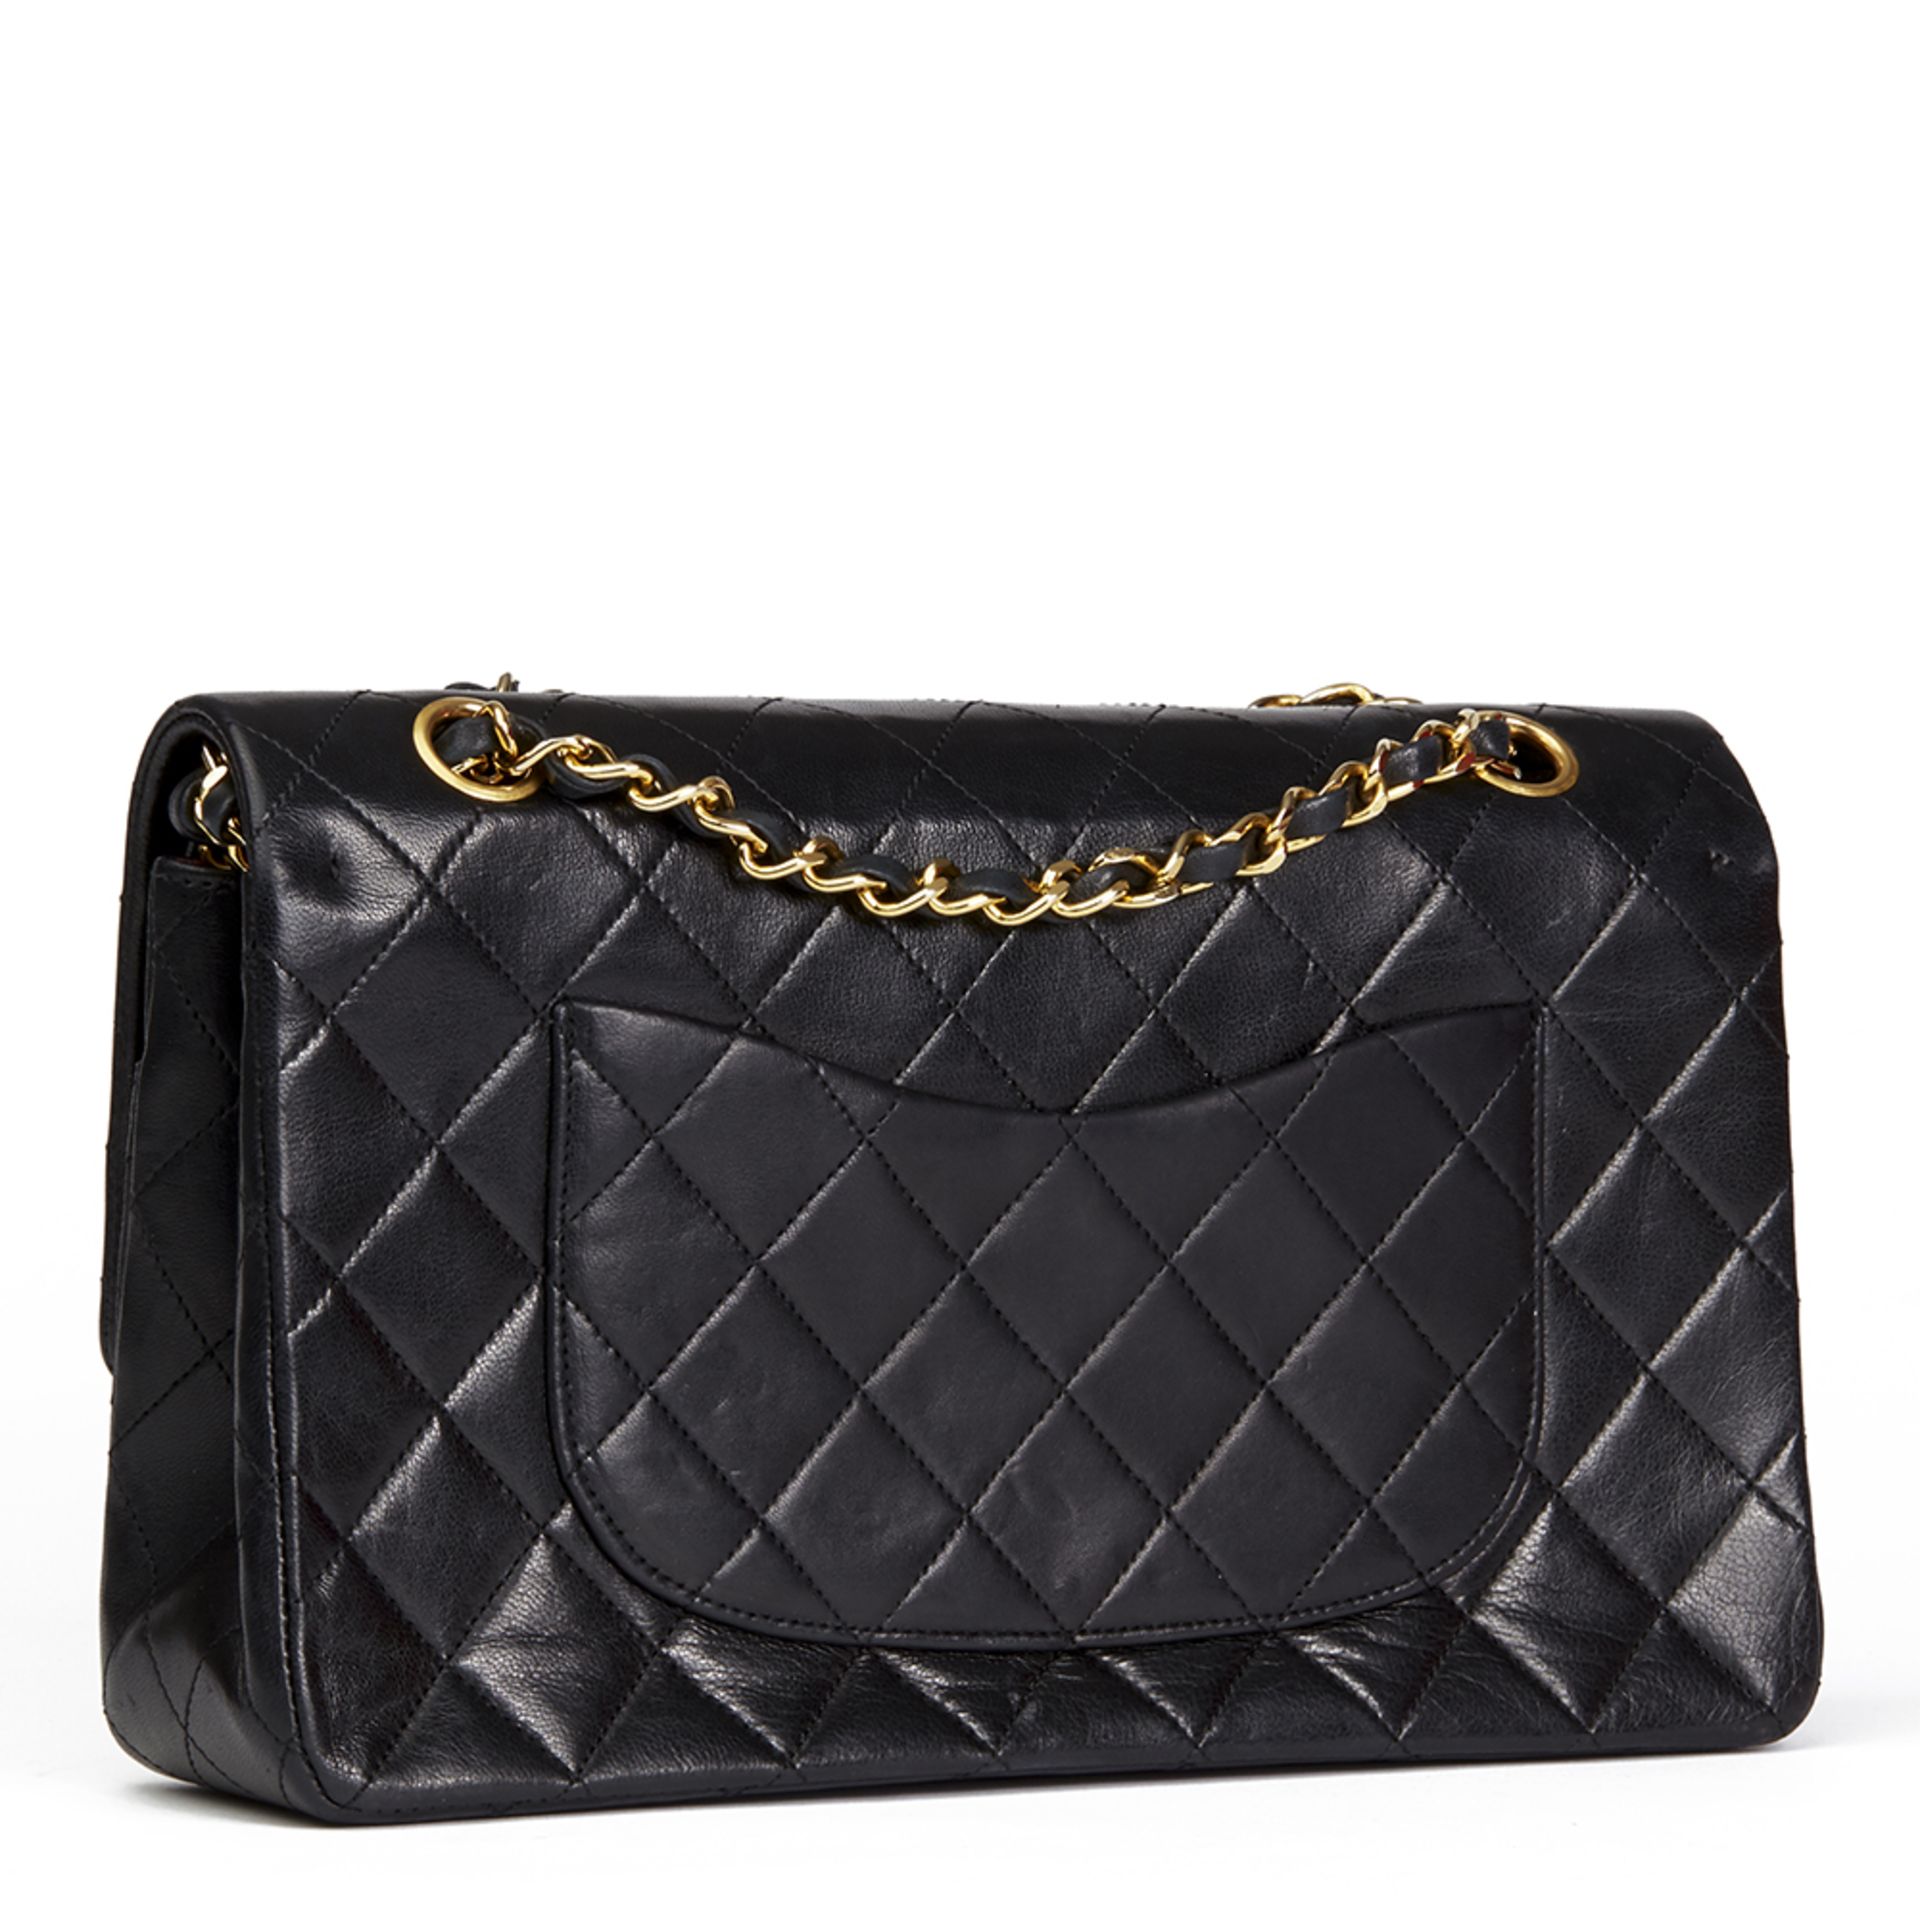 Black Quilted Lambskin Vintage Medium Classic Double Flap Bag - Image 6 of 10